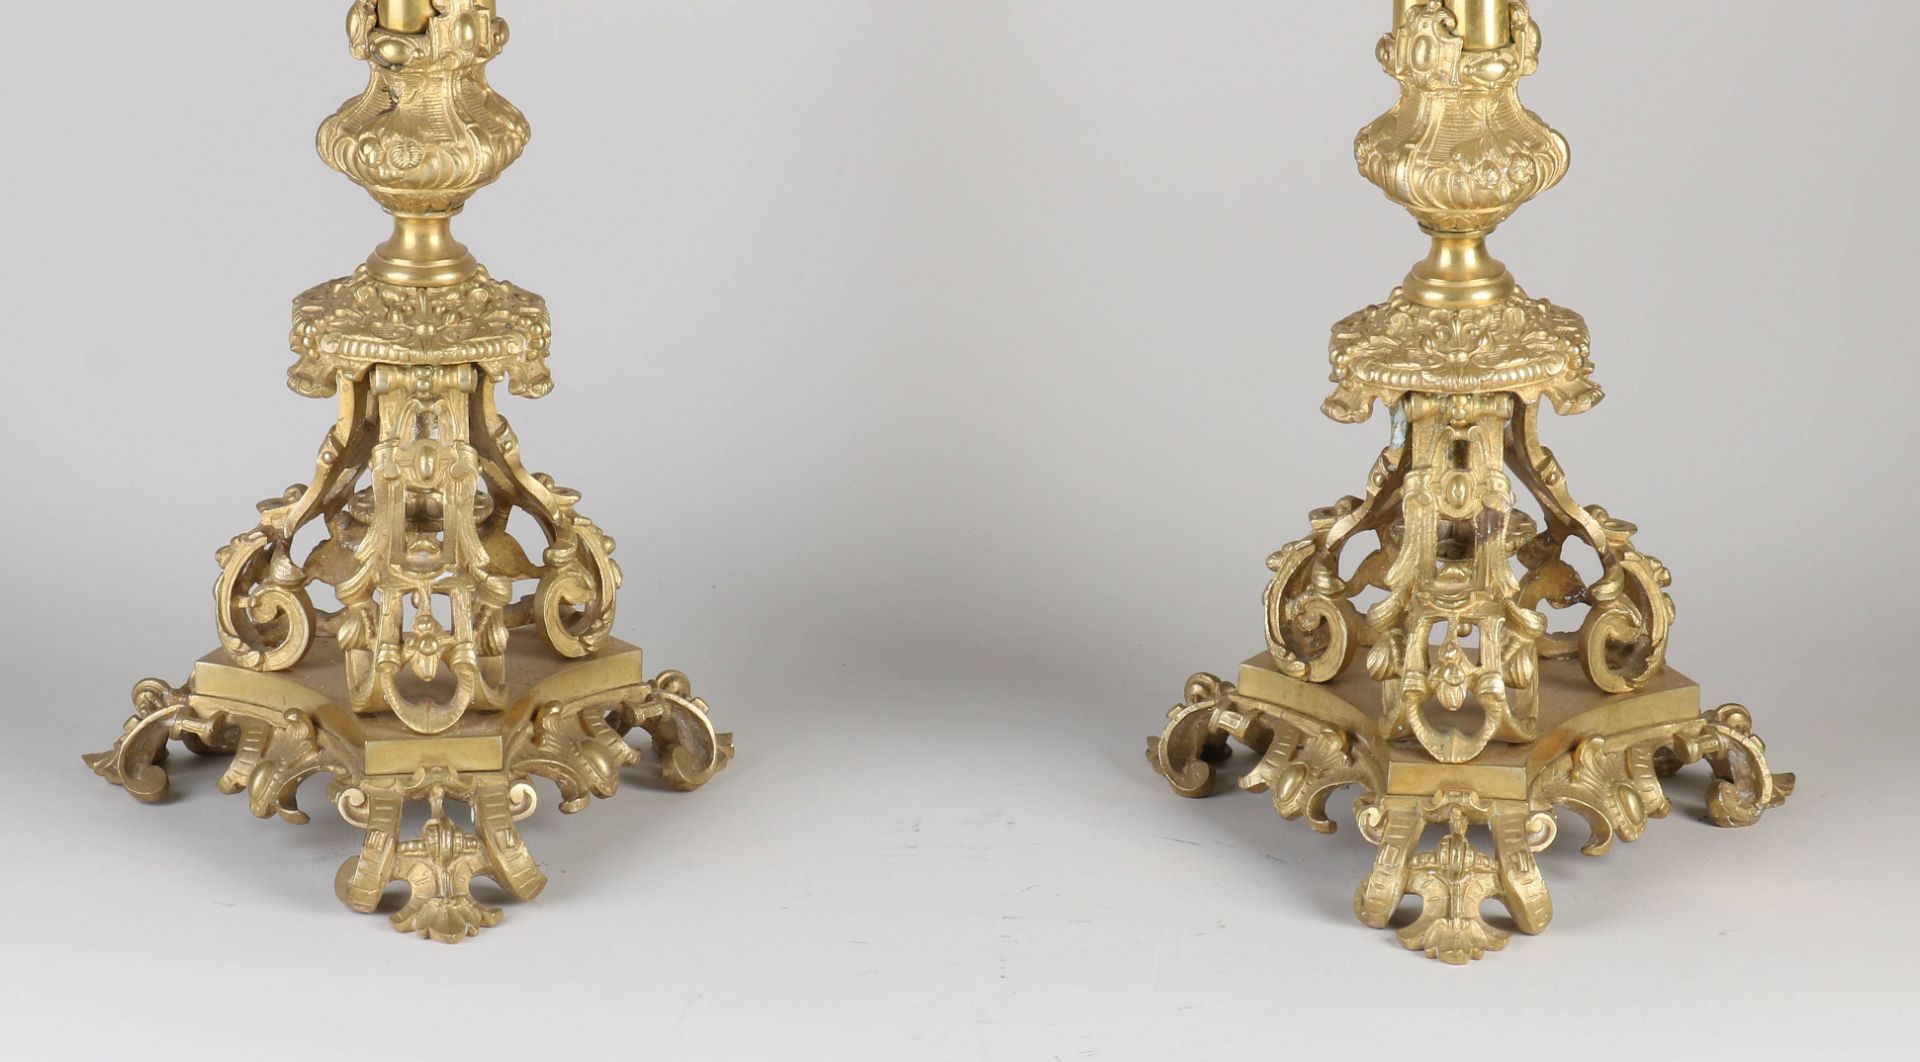 Two fire-gilded church candlesticks - Image 2 of 3